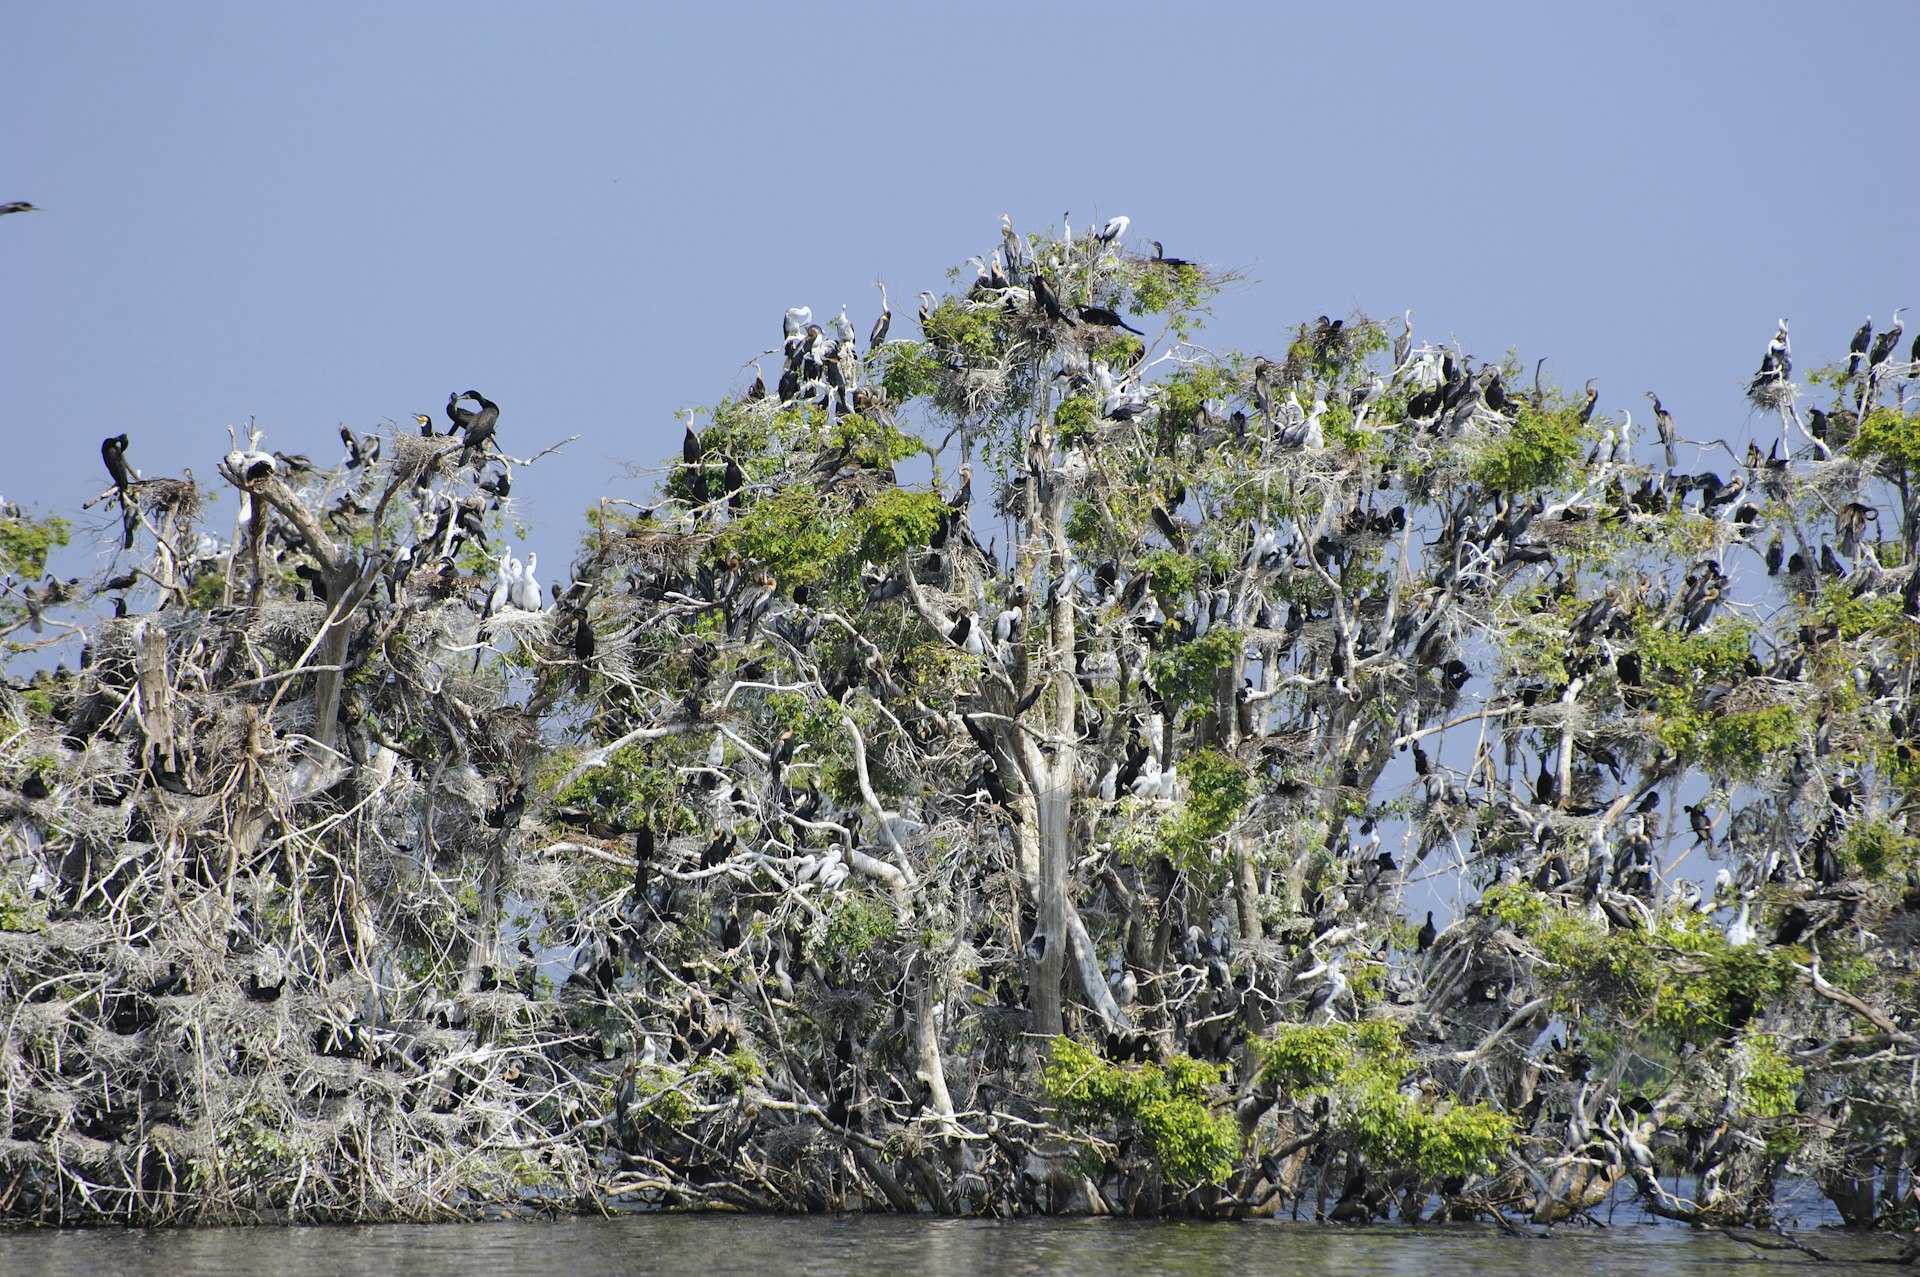 Flocks of nesting pelicans, comorants, and herons crowd the canopies of submered trees at Prek Toal Bird Sanctuary on Tongle Sap lake